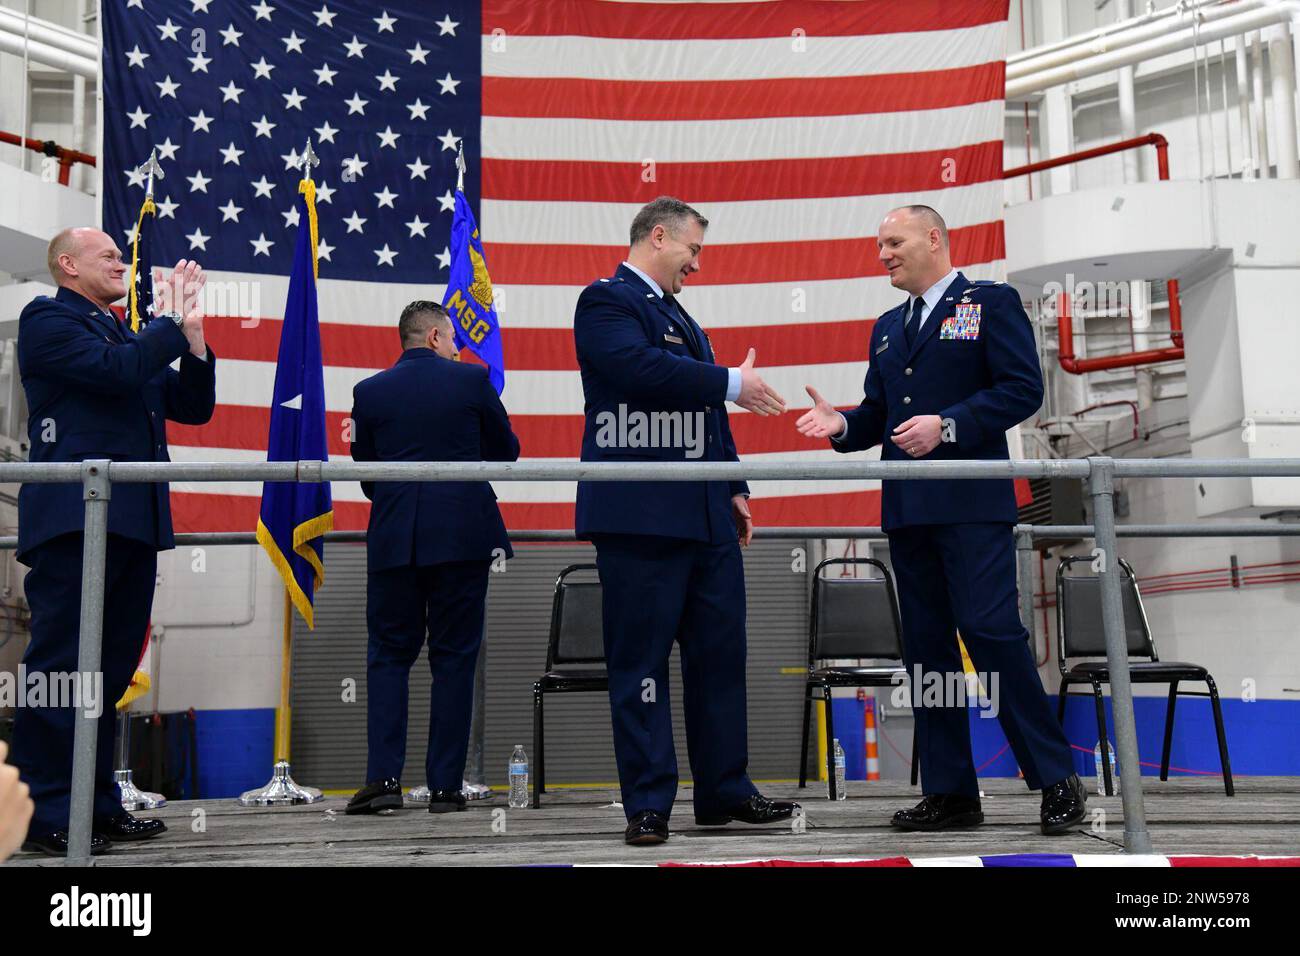 U.S. Air Force Lt. Col. Francis J. Farrelly Jr., Commander of the 105th Mission Support Group, and U.S. Air Force Col. Edward W. Cook Jr., the outgoing commander of the 105th MSG, congratulate each other during the change of command ceremony at Stewart Air National Guard Base, New York, January 8, 2023. Stock Photo